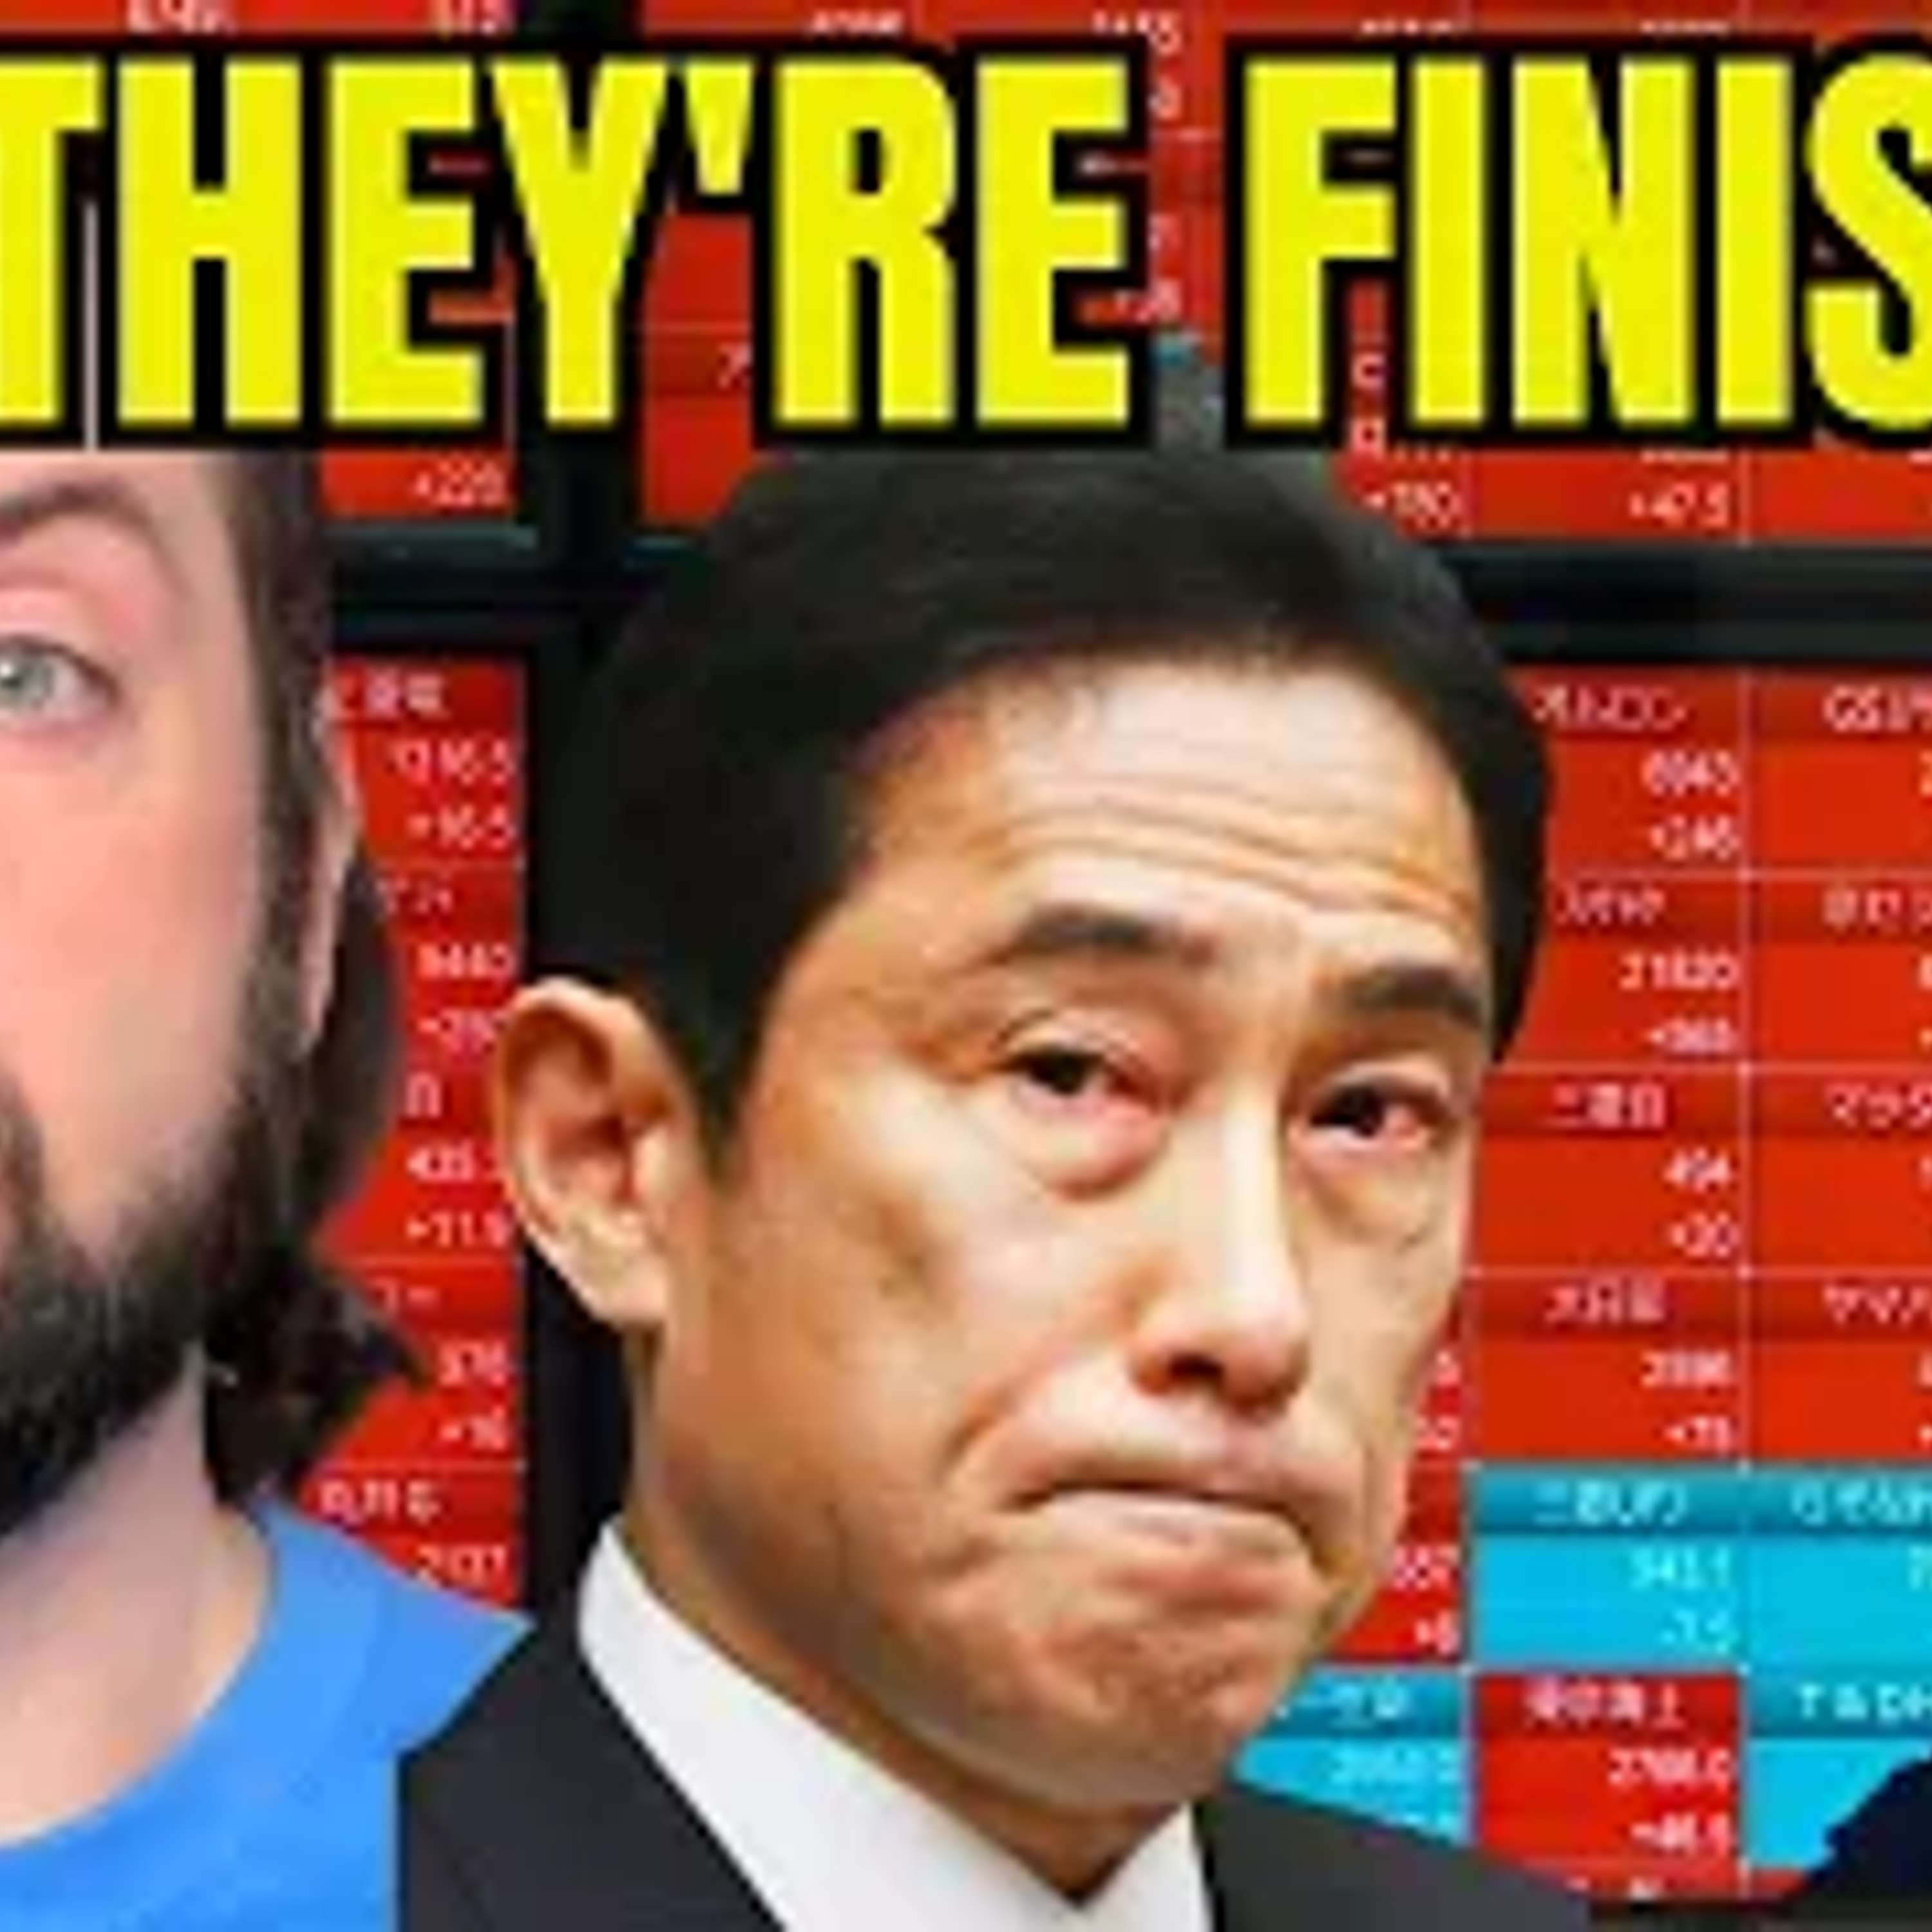 The Japanese Government Is Getting Desperate As The Yen Collapses